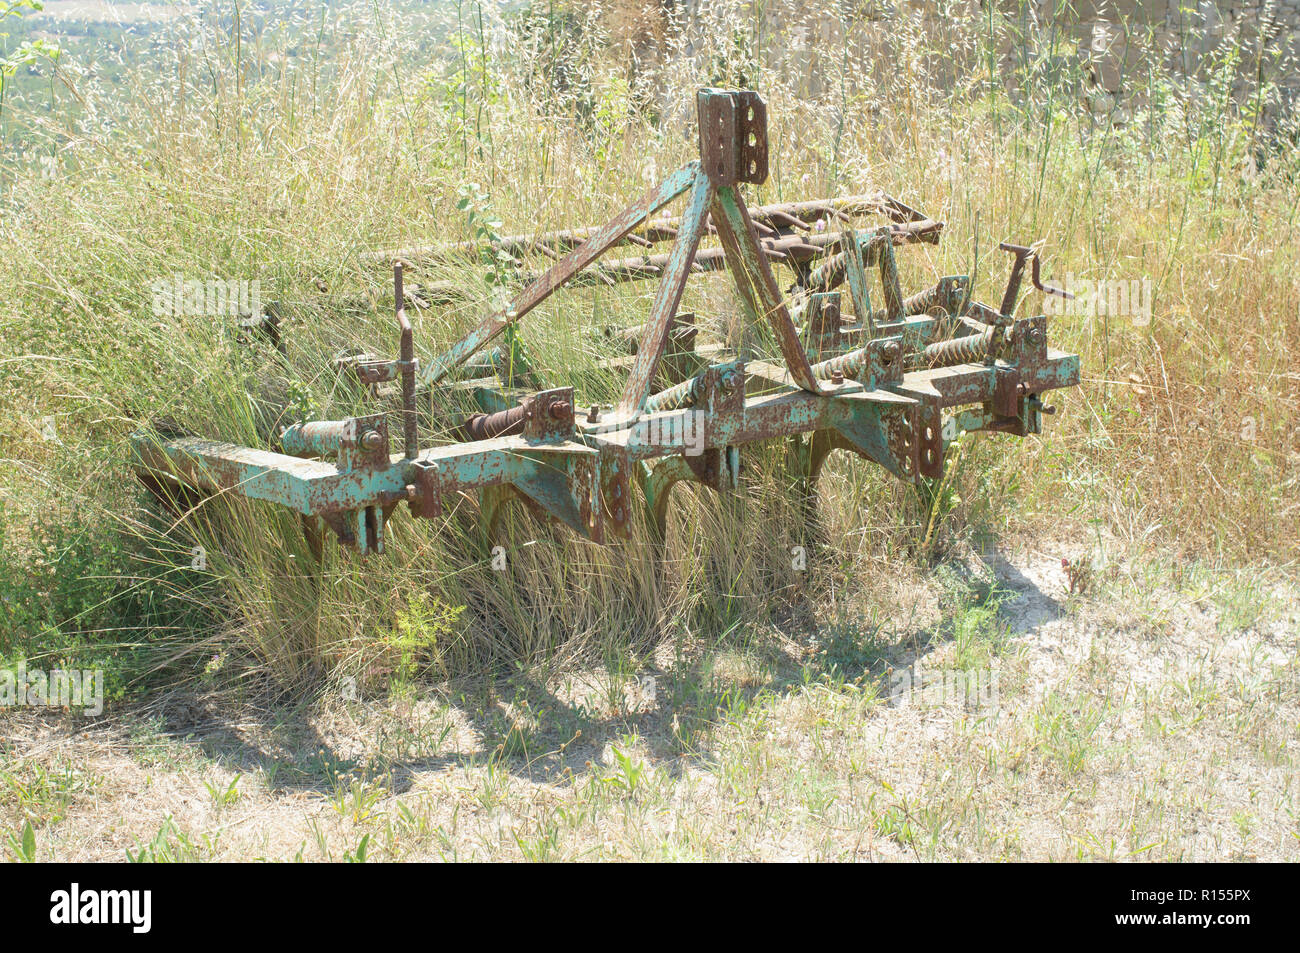 abandoned agricultural harrows machinery Stock Photo